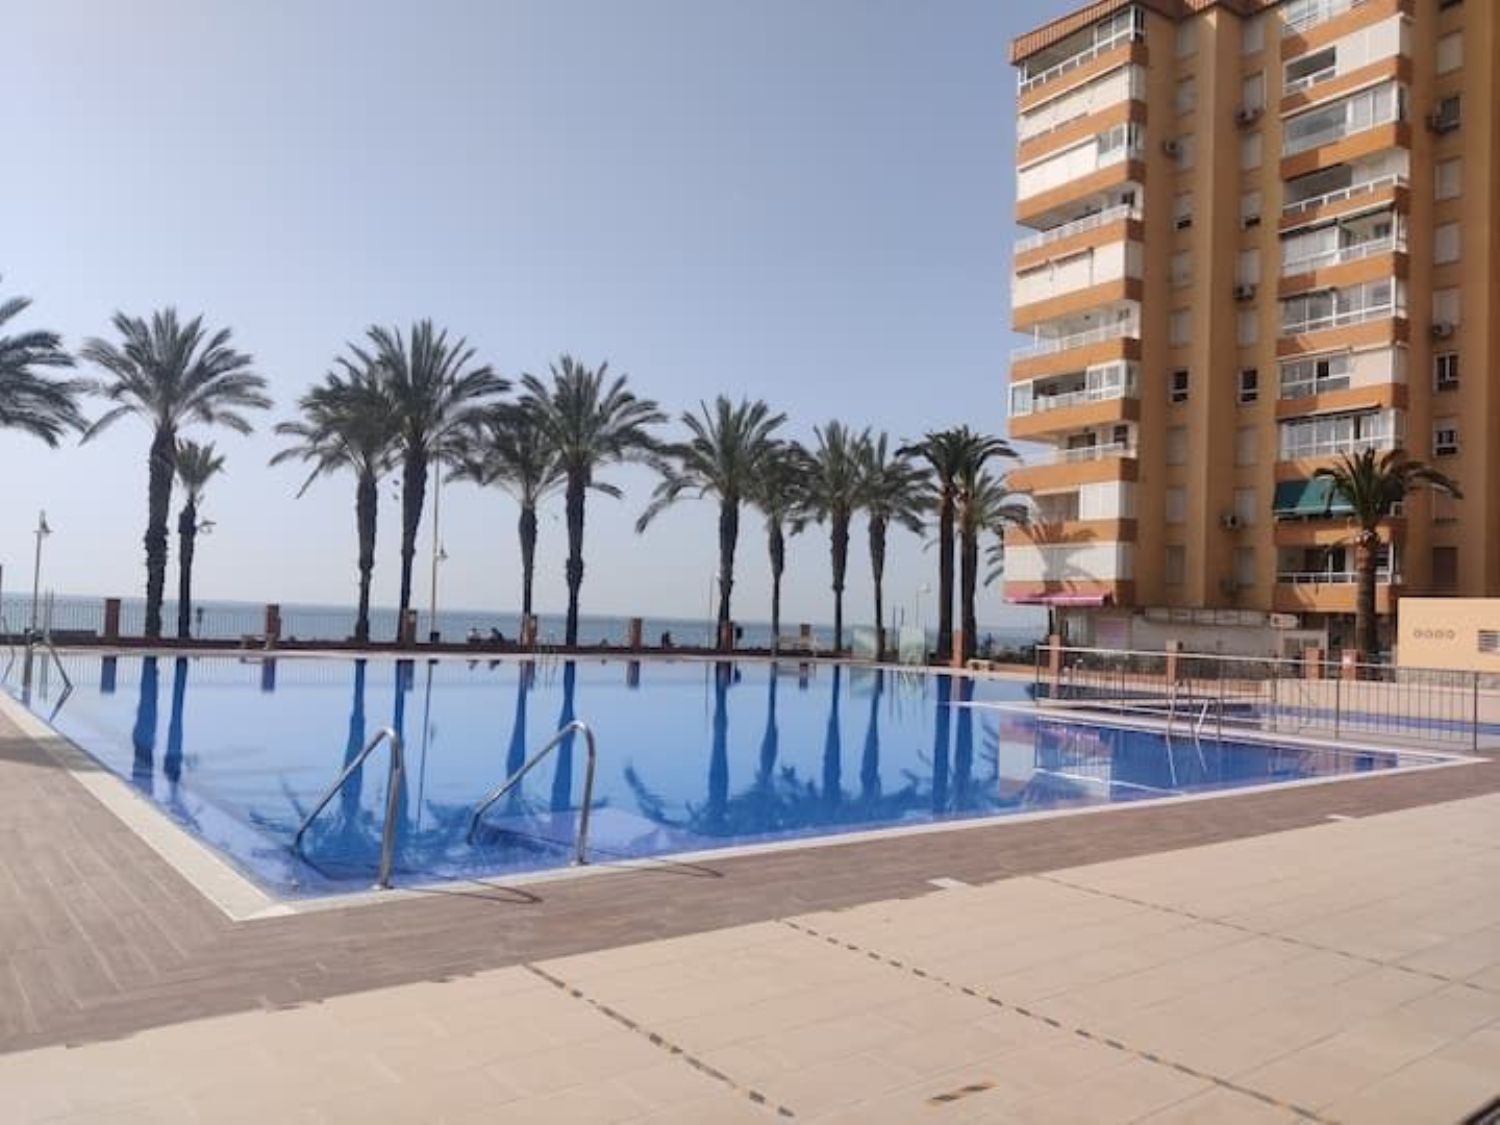 Apartment for sale on the seafront in Algarrobo Costa